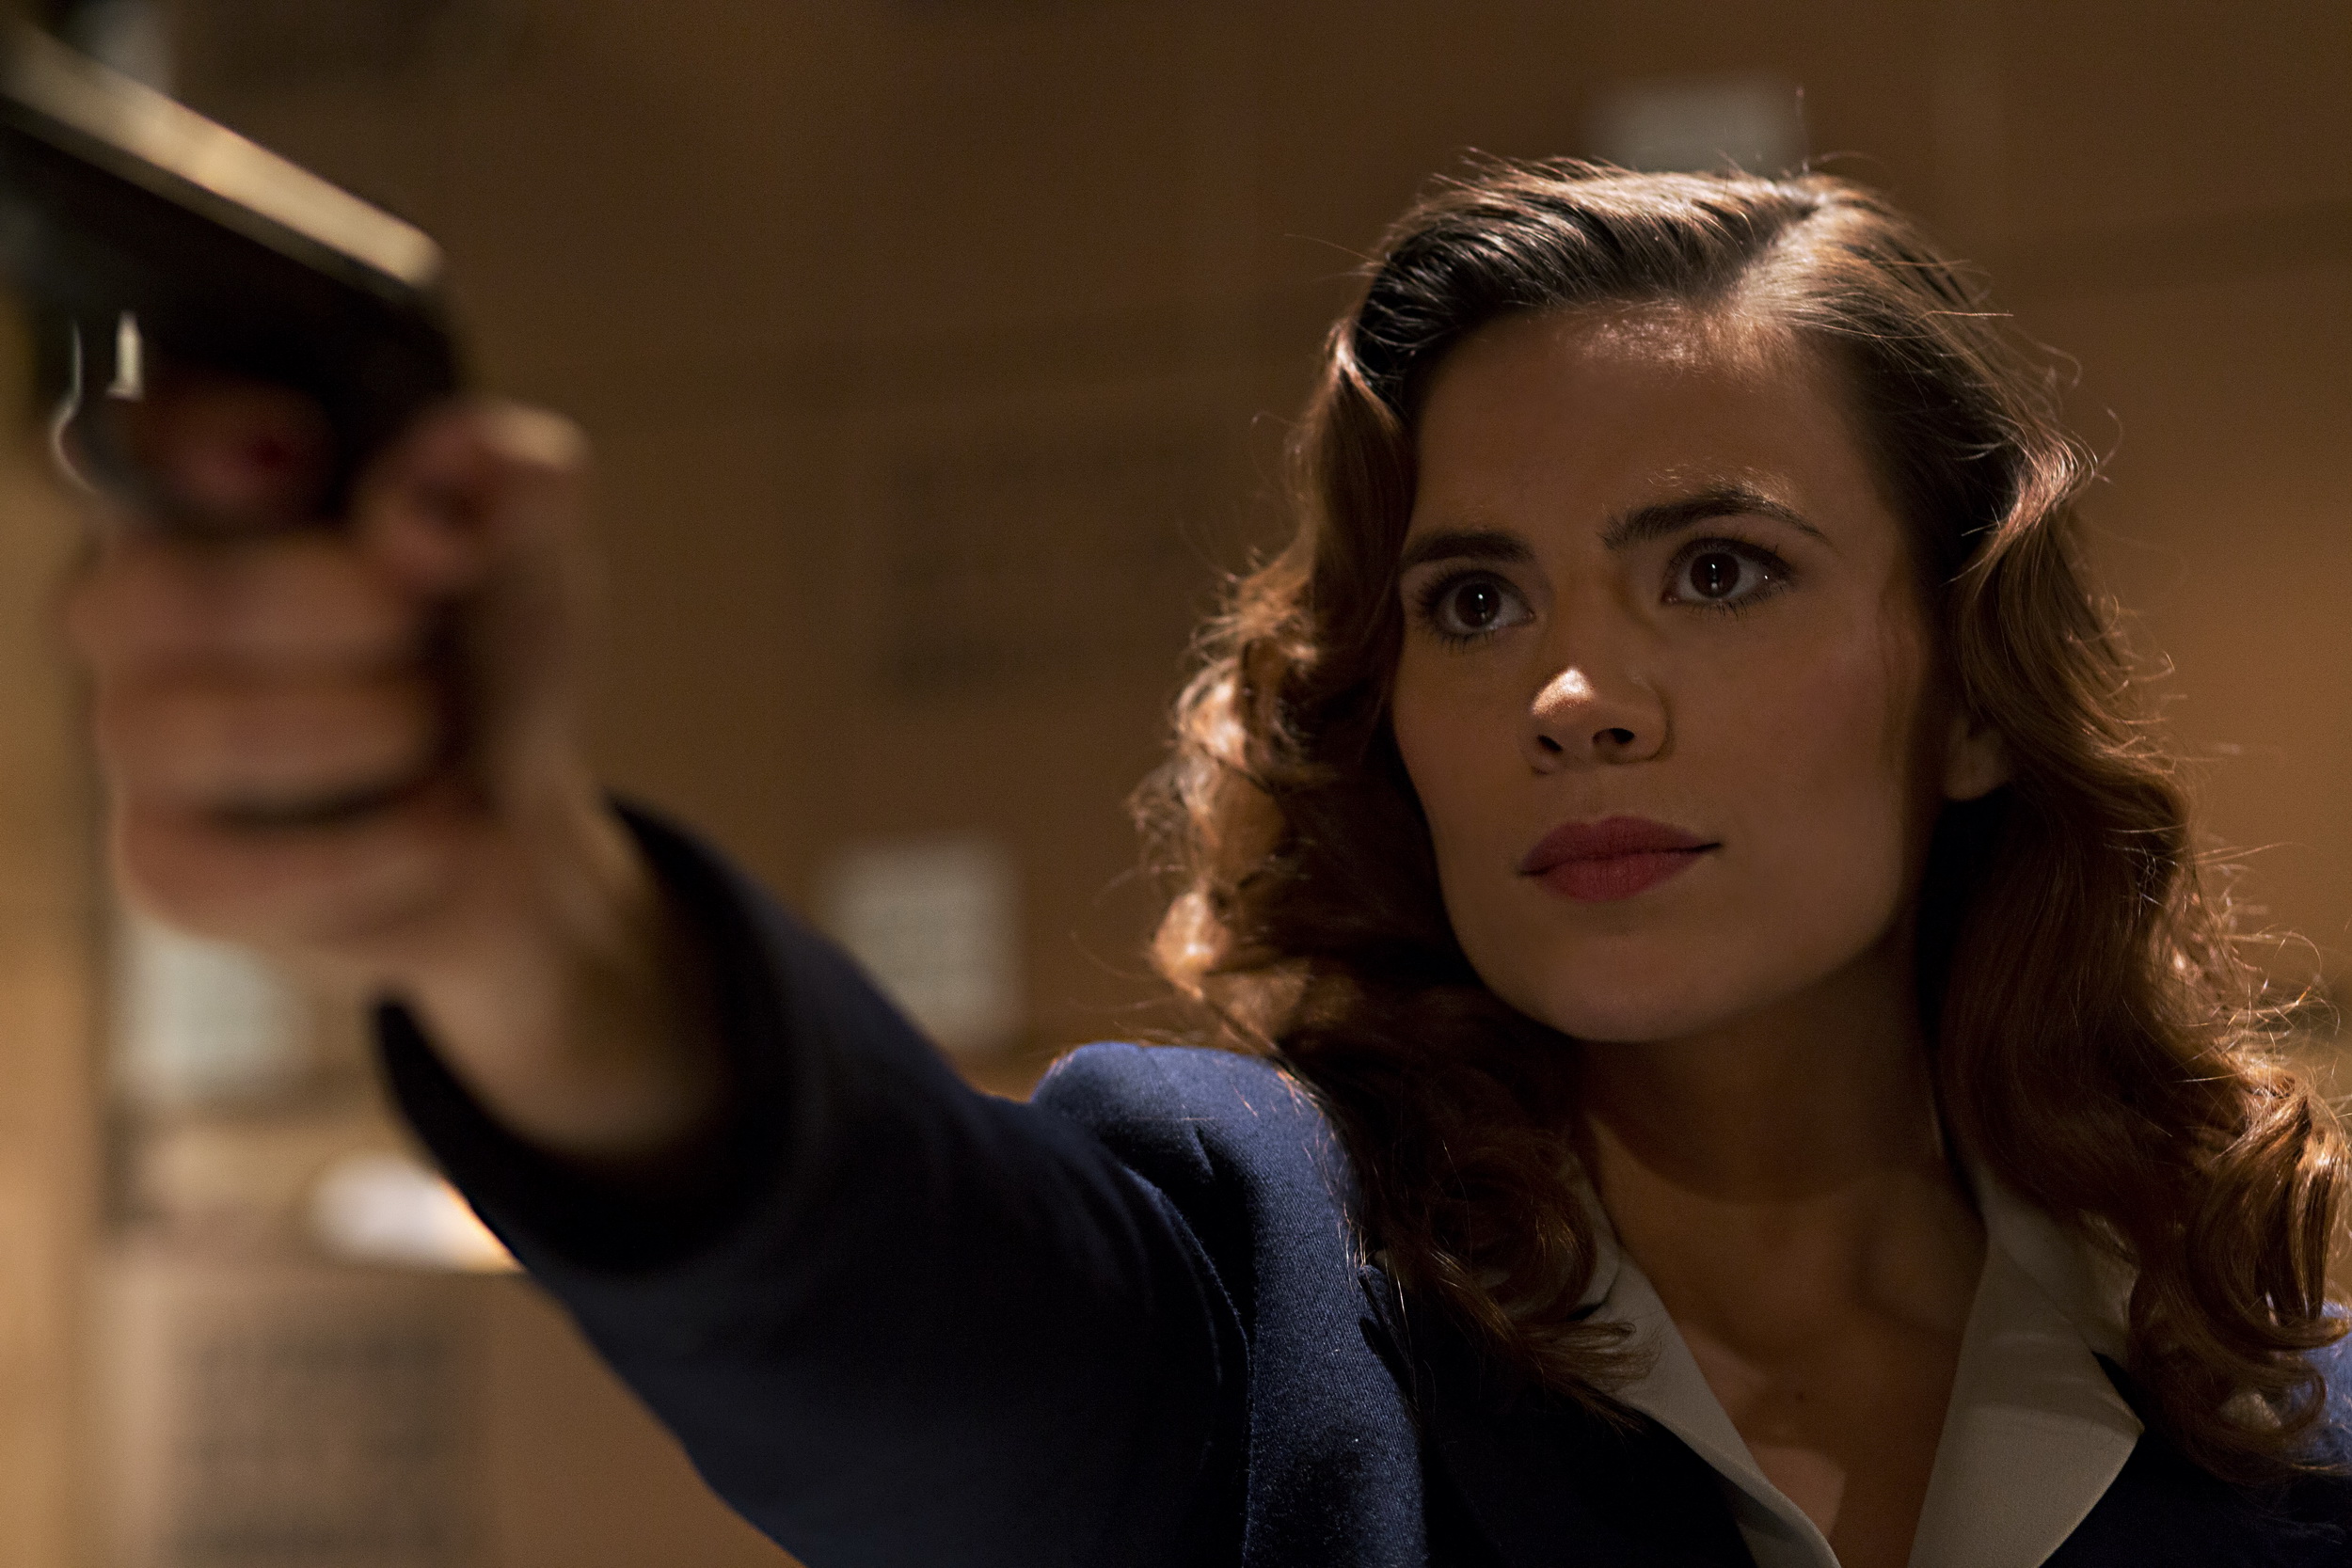 Geek insider, geekinsider, geekinsider. Com,, reasons to get excited for 'agent carter', entertainment